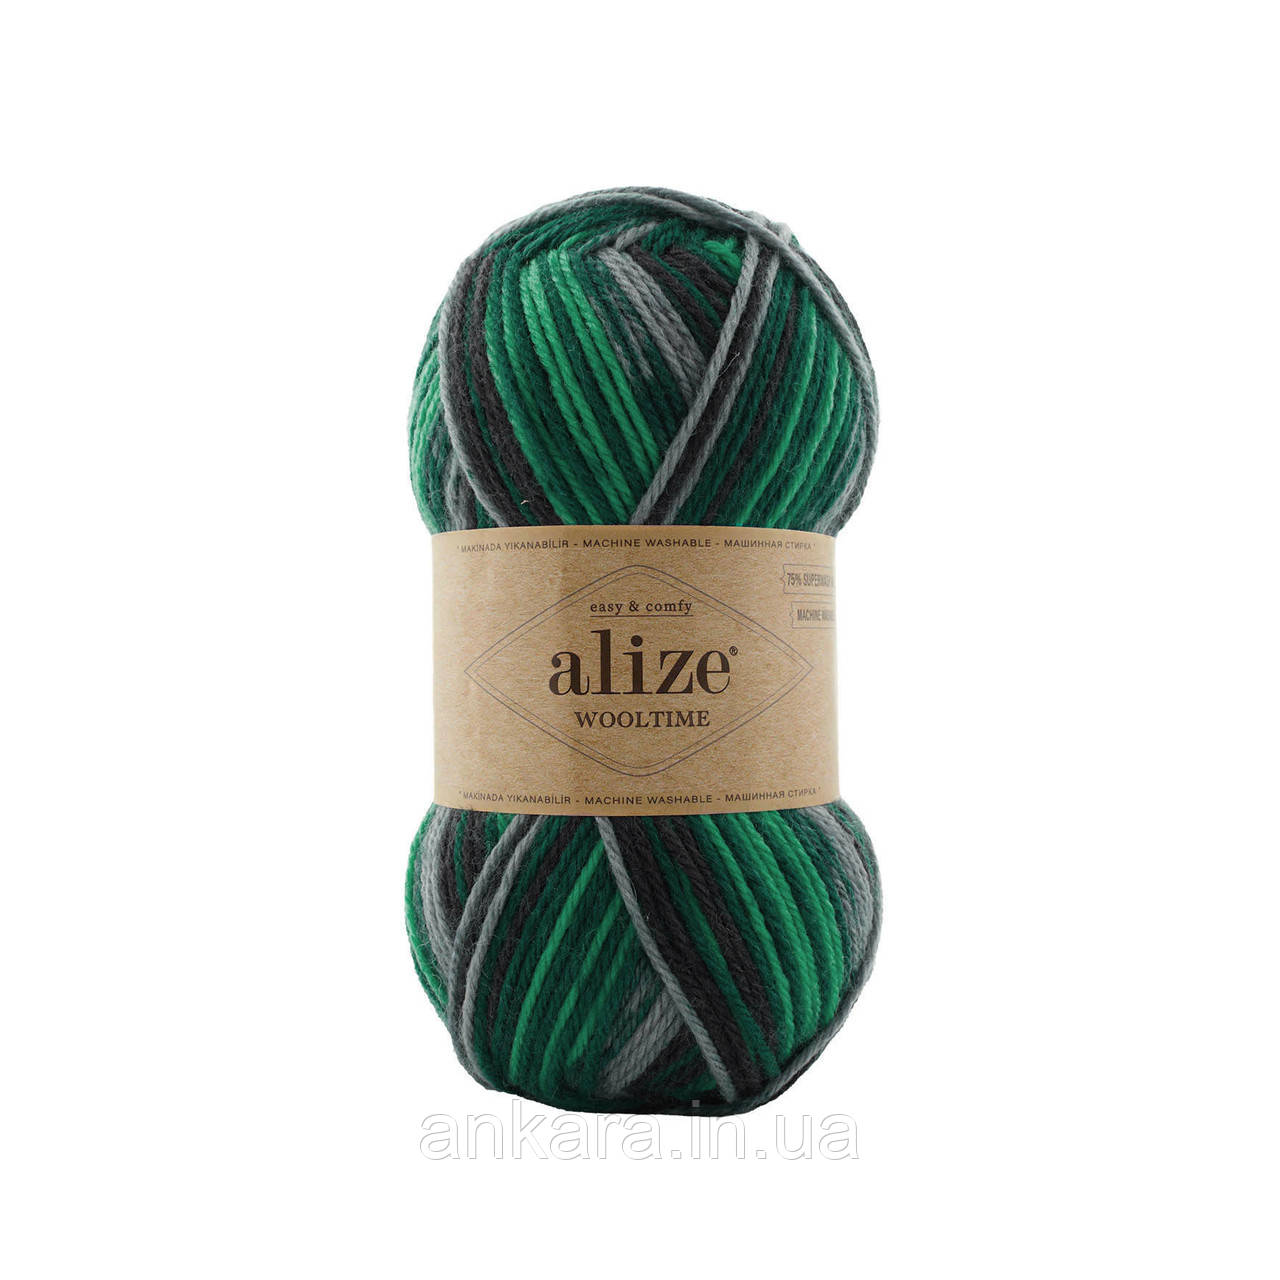 Alize Wooltime 11012